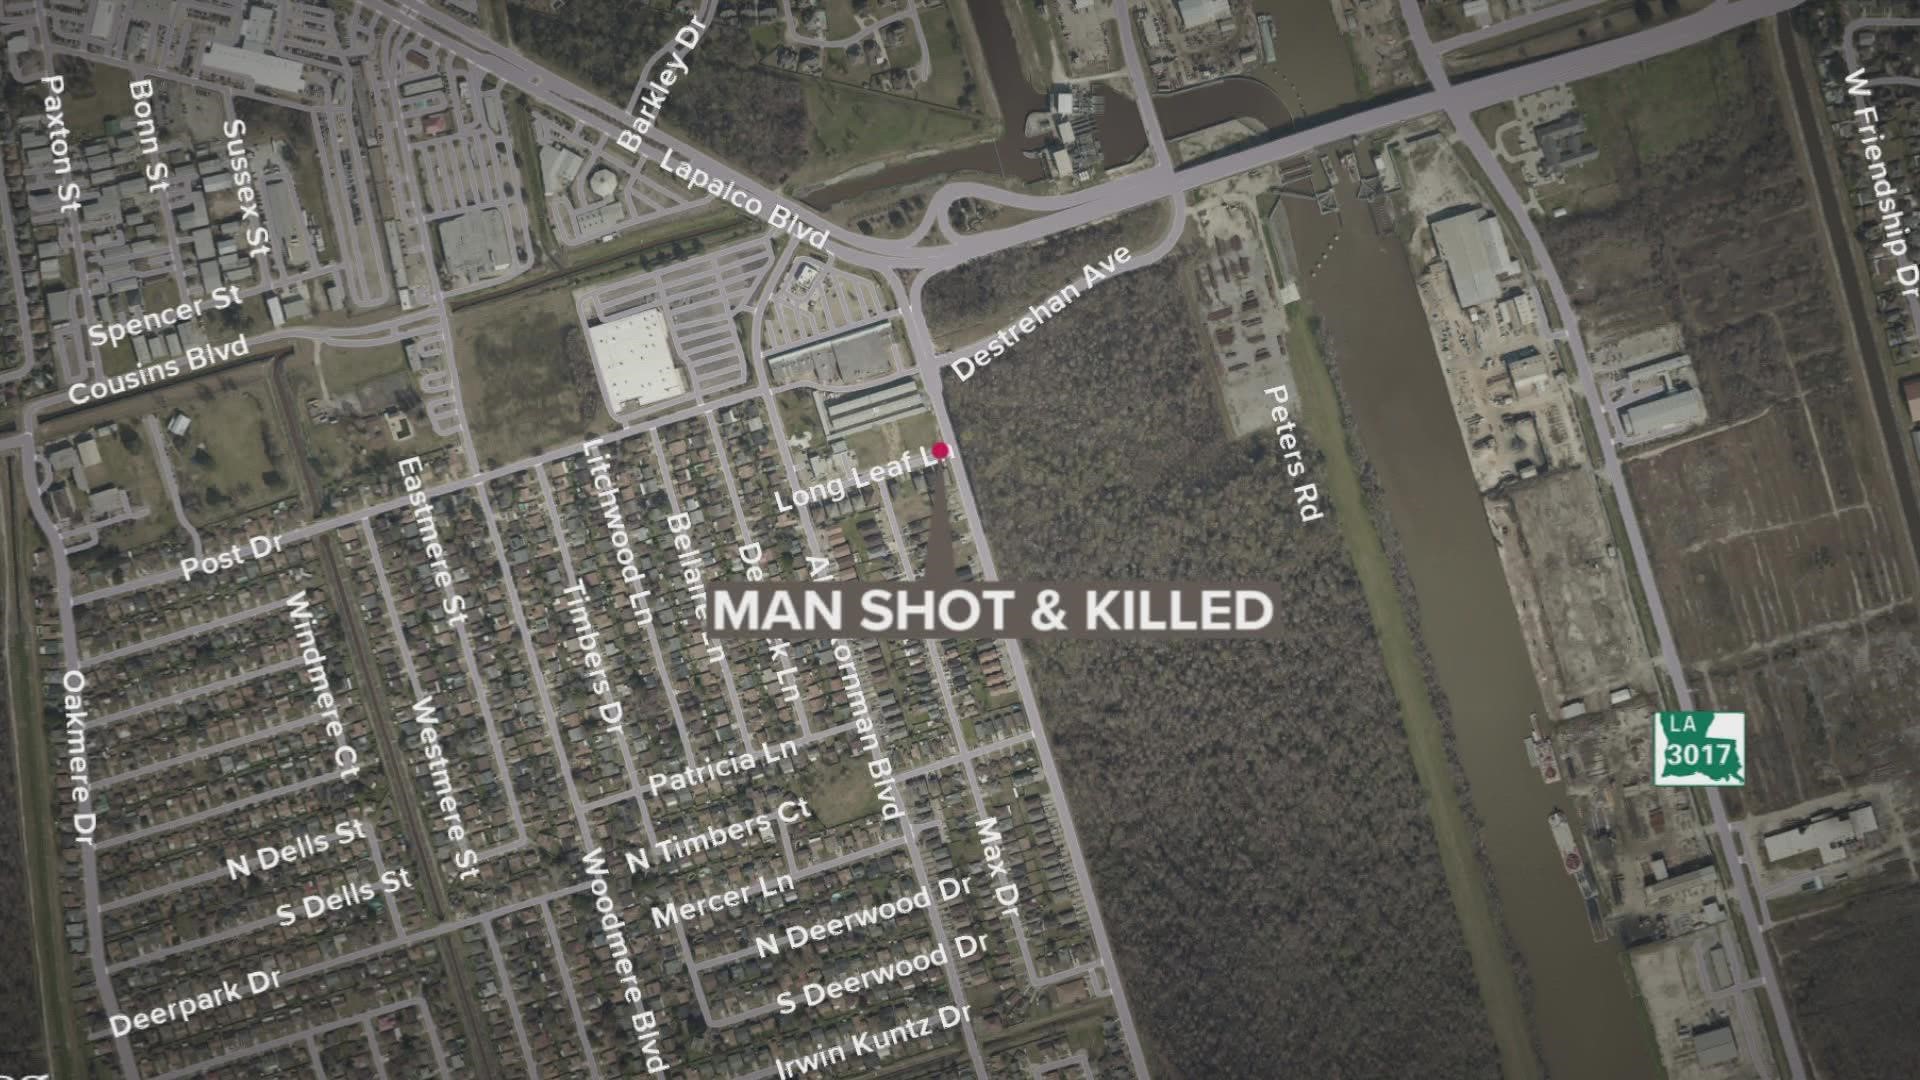 The shooting occurred in the 3700 block of Long Leaf Lane.